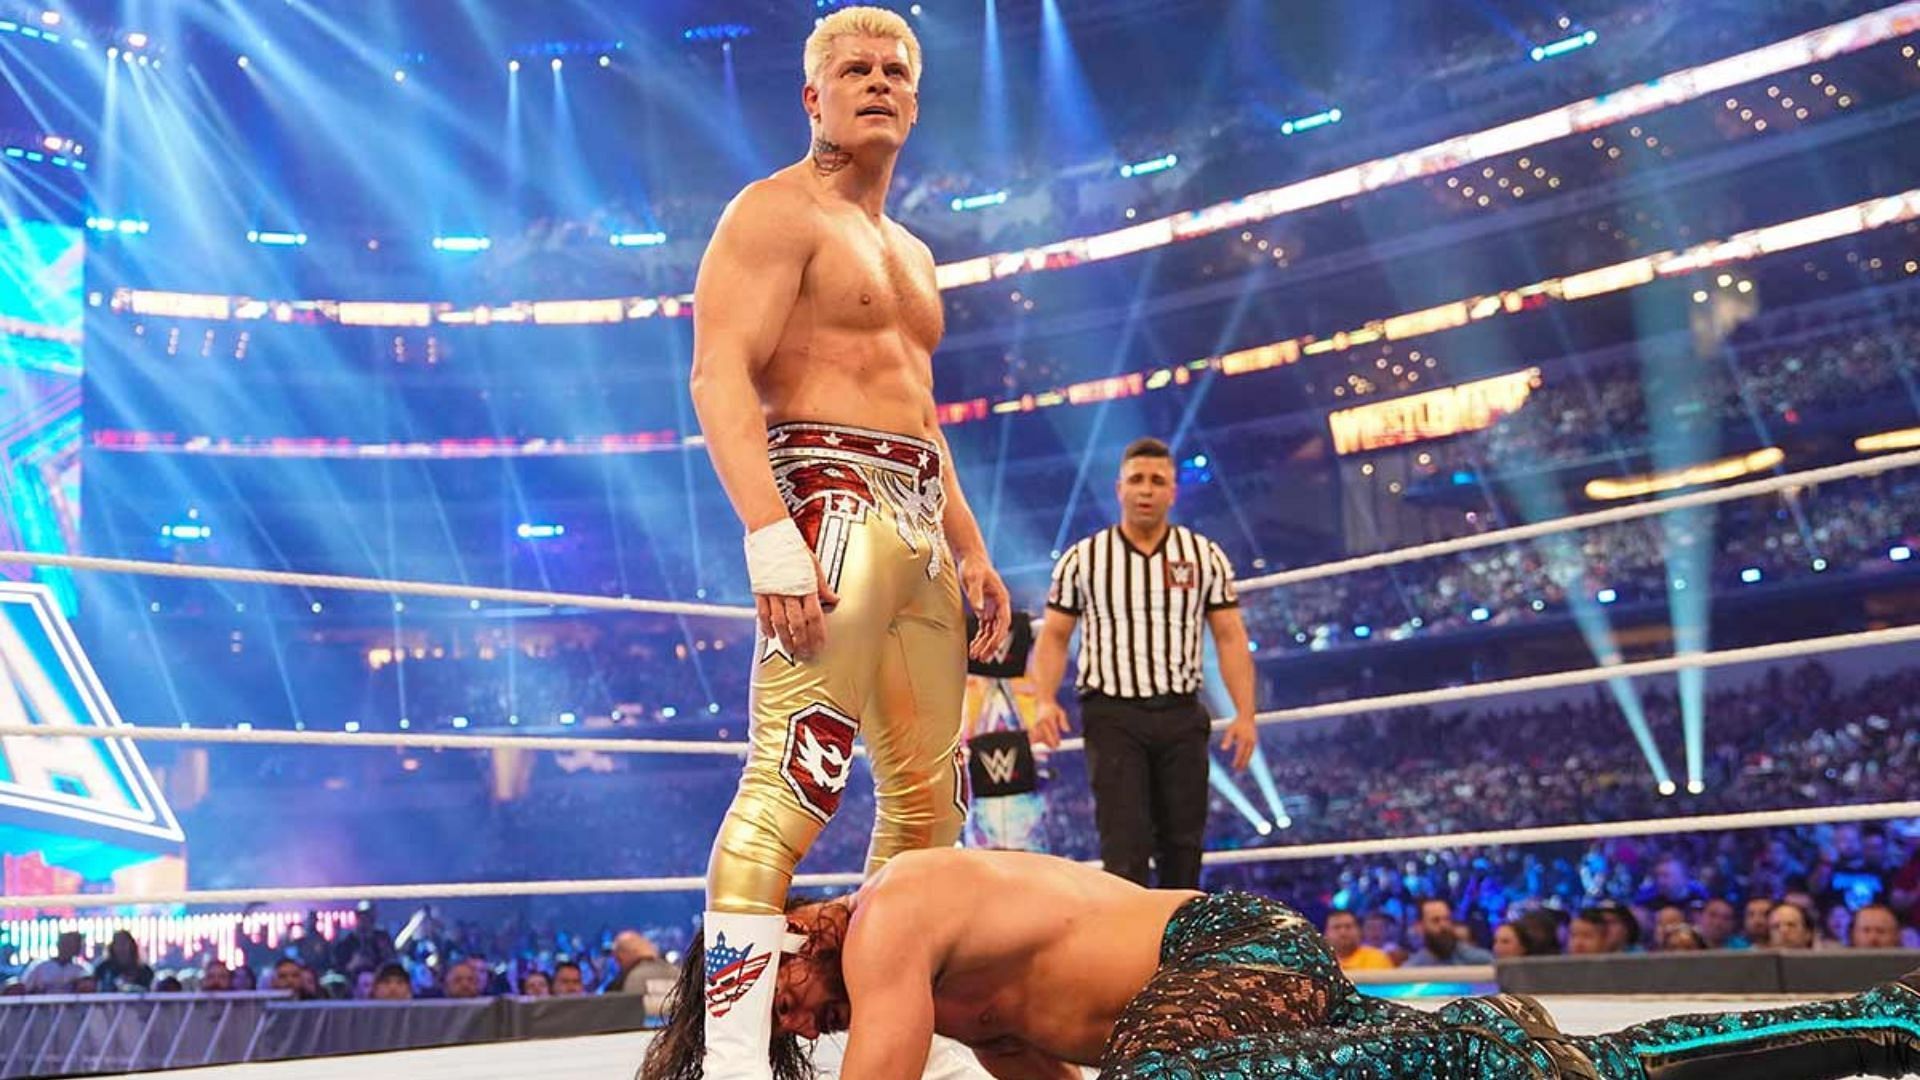 Cody Rhodes is set to challenge Roman Reigns at WrestleMania 39